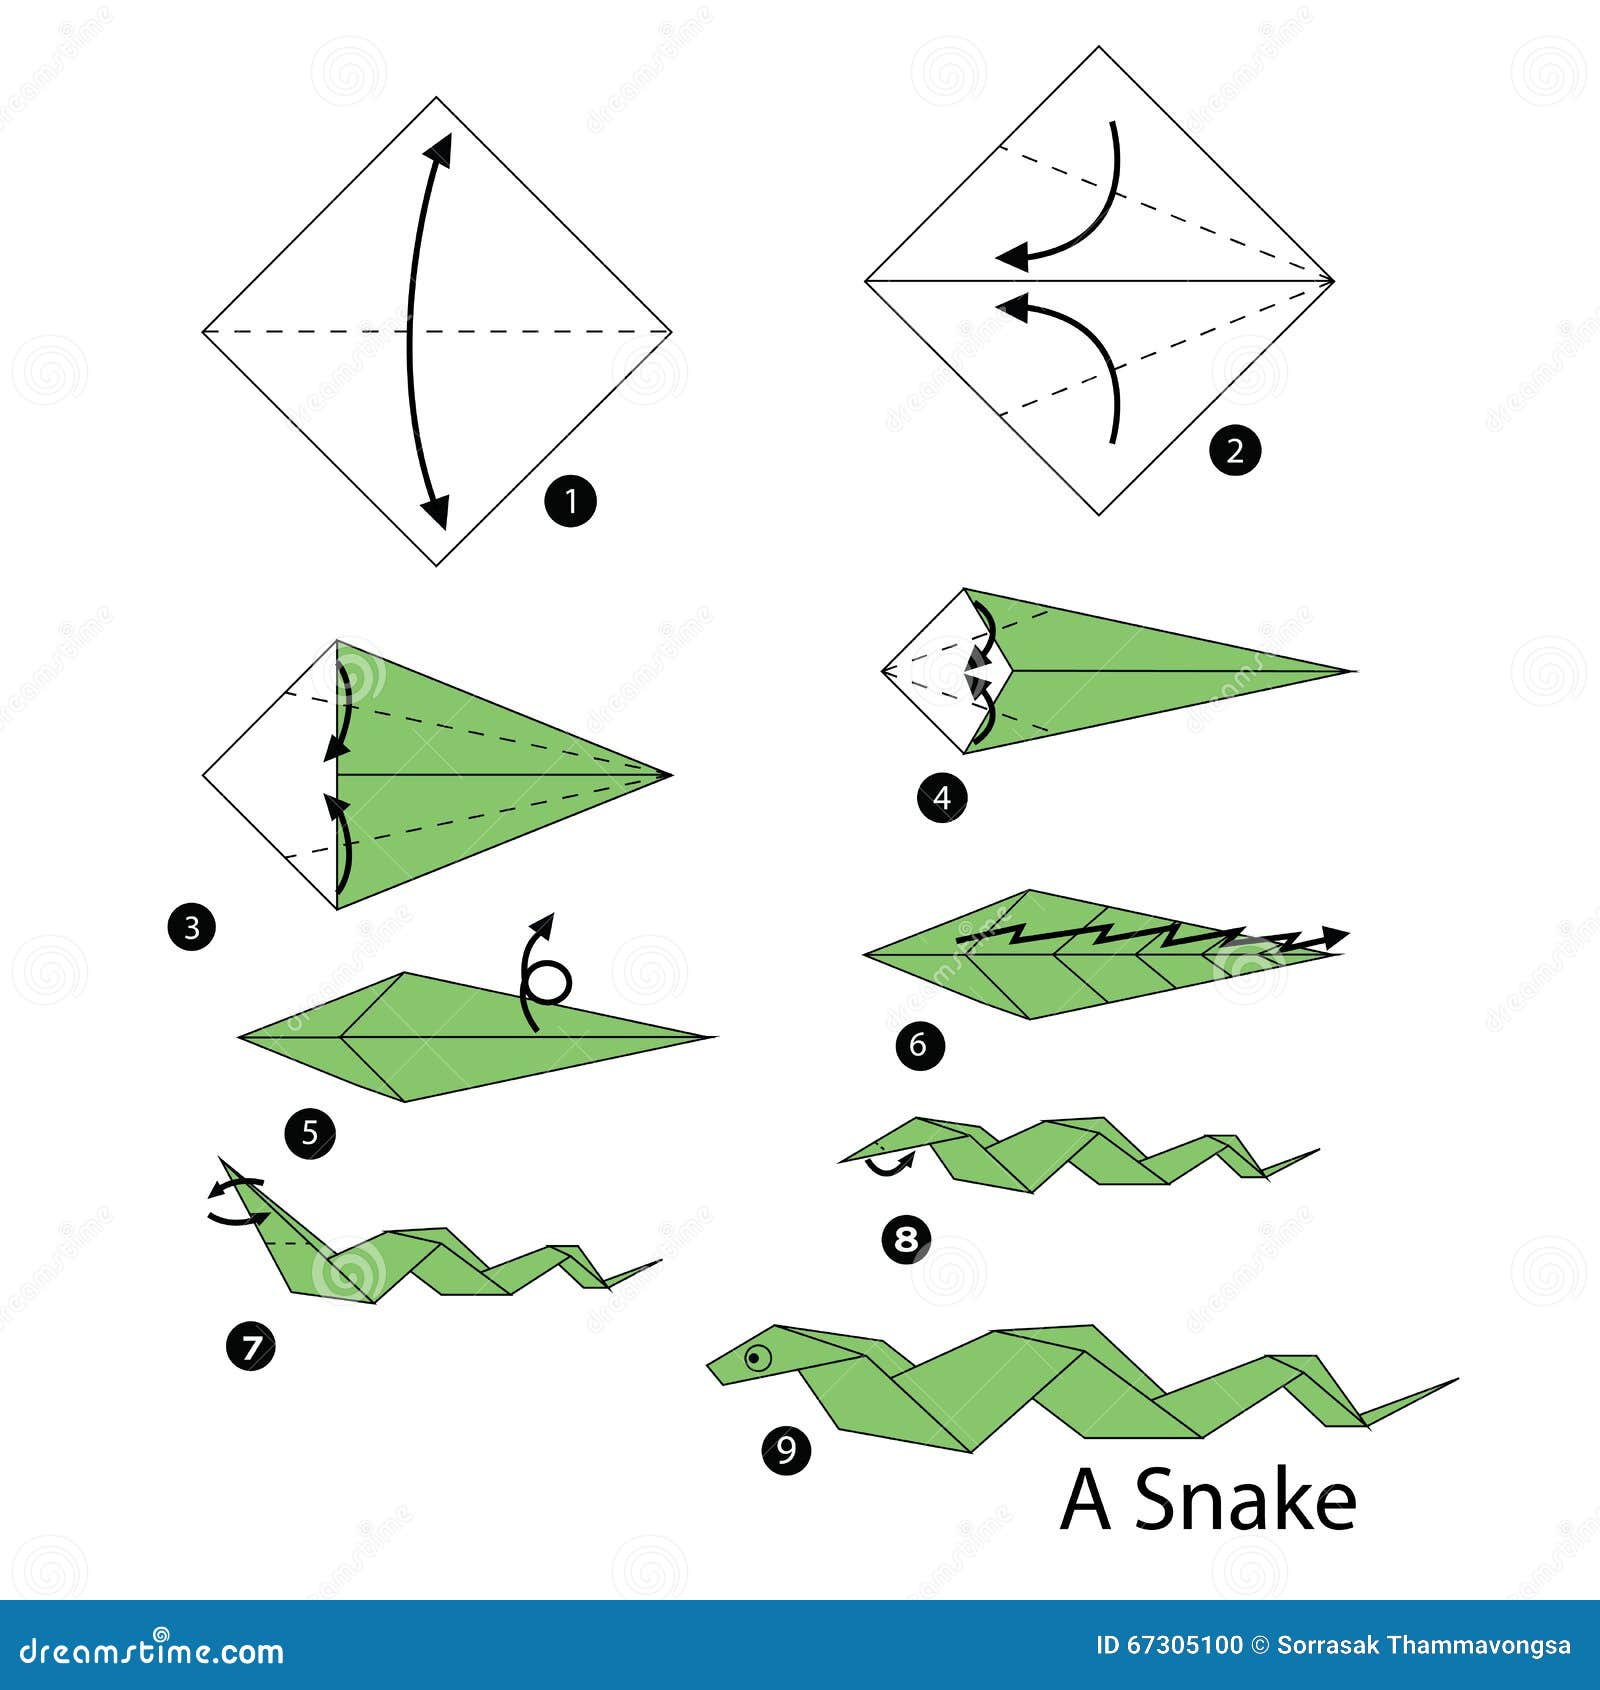 step by step instructions how to make origami snake.